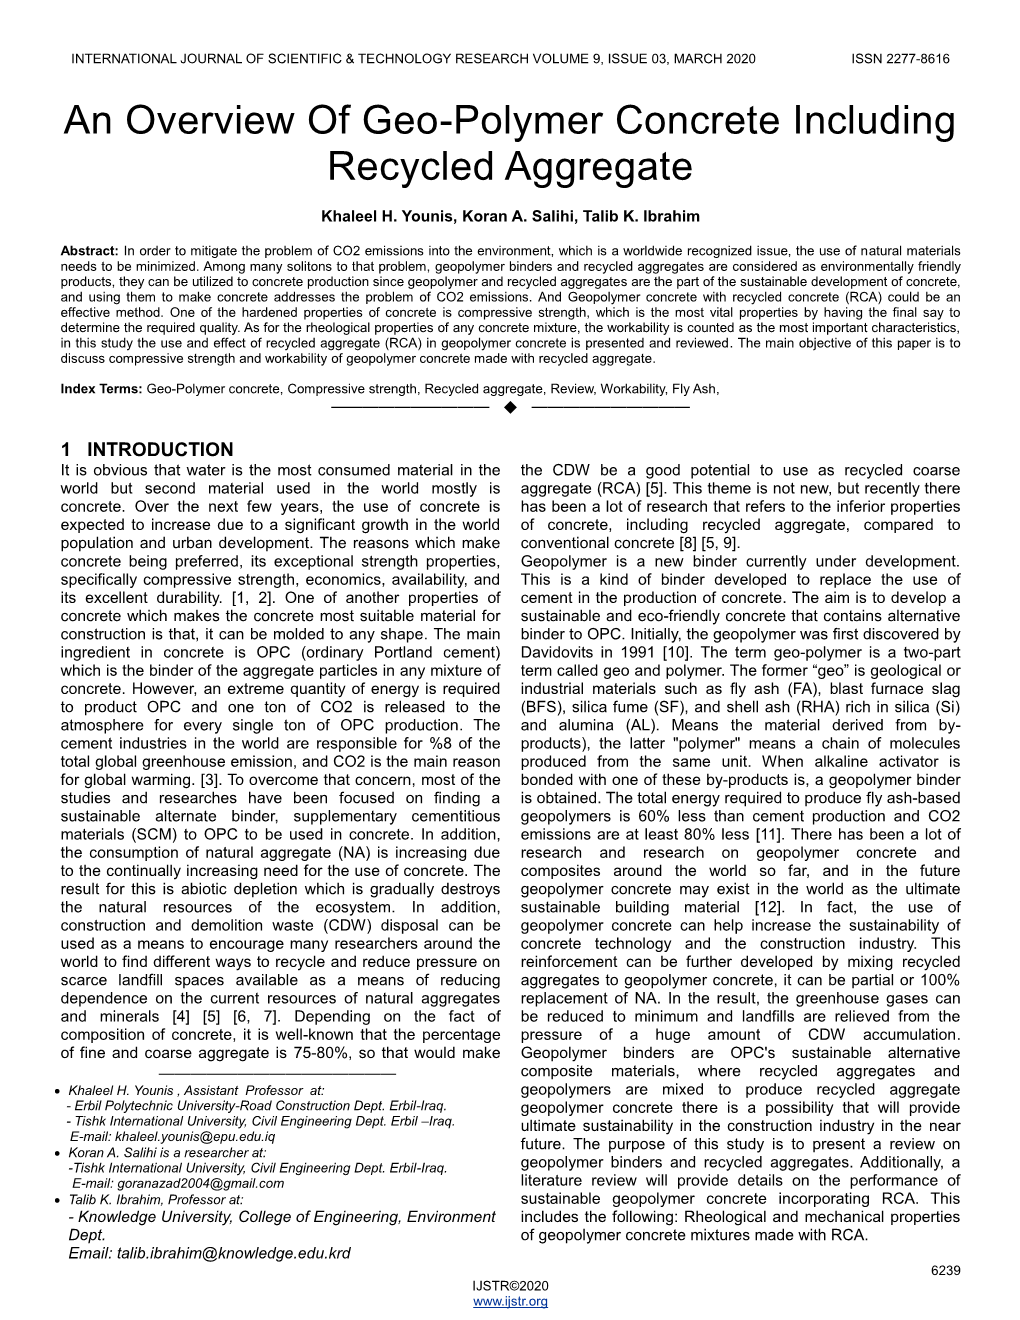 An Overview of Geo-Polymer Concrete Including Recycled Aggregate